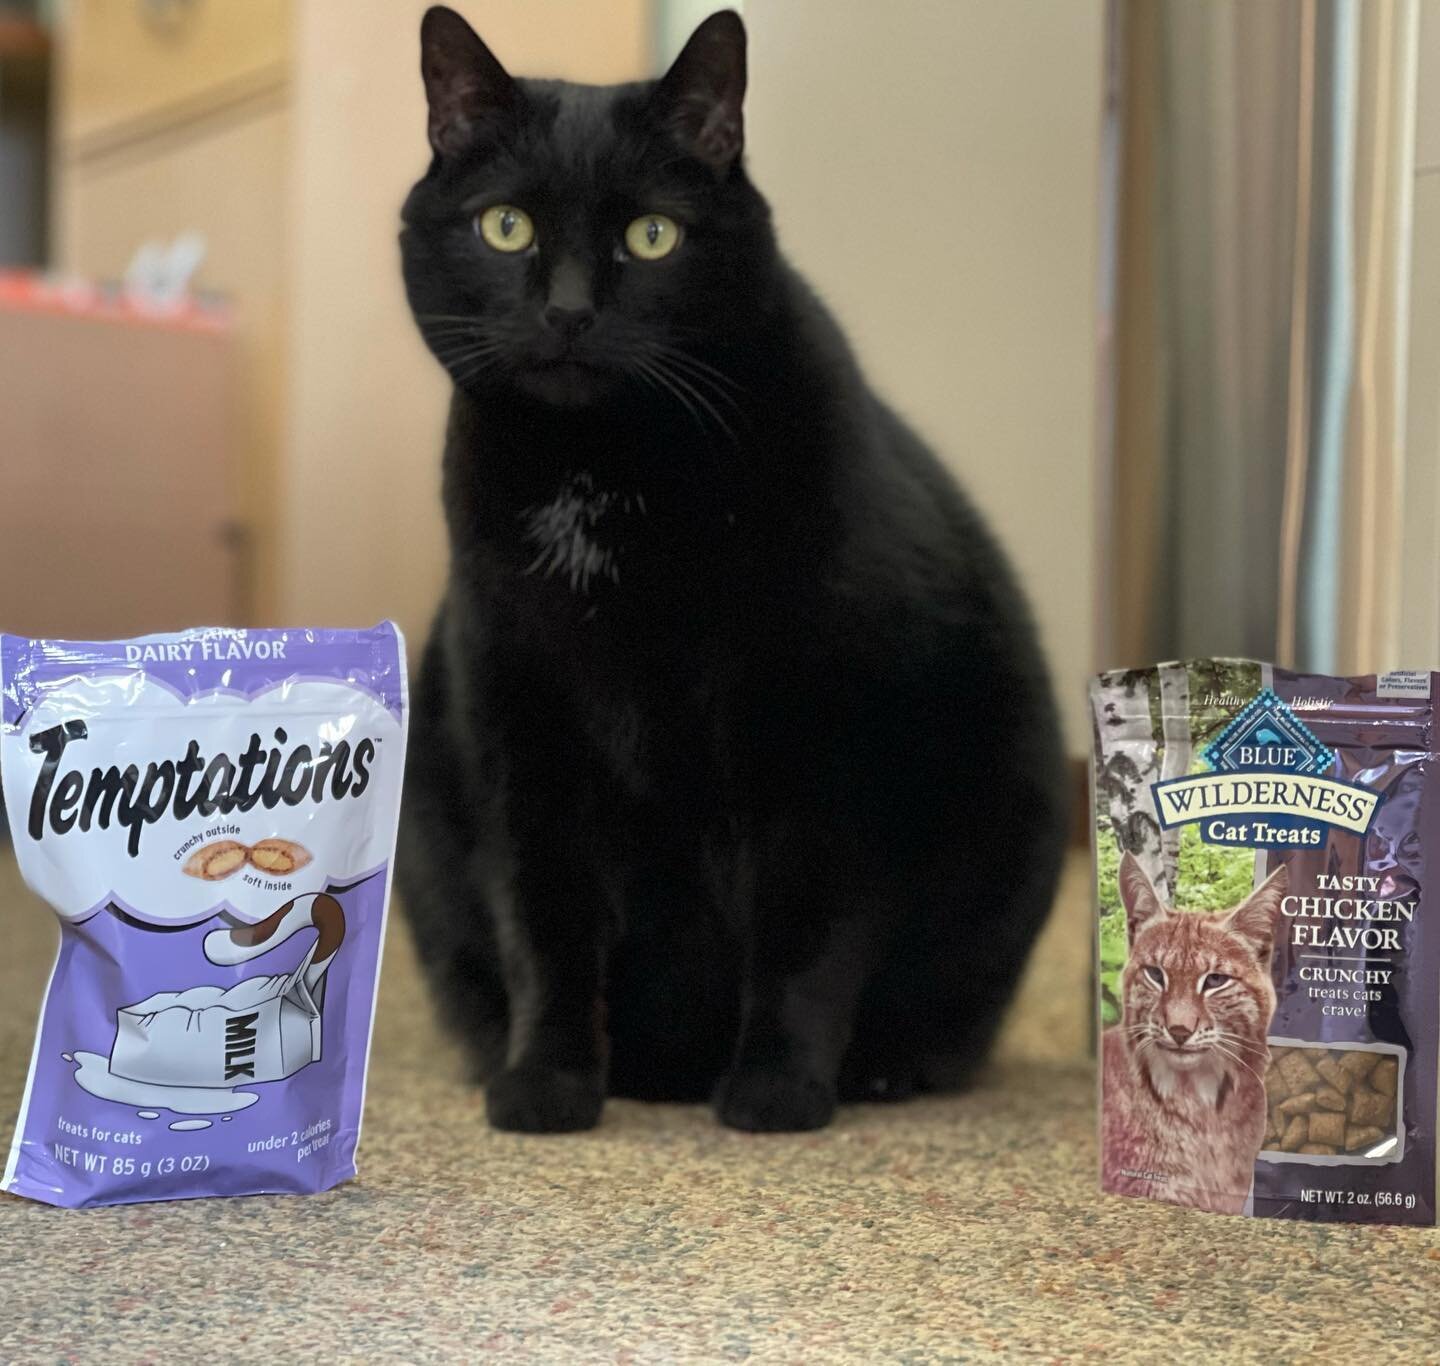 It&rsquo;s a big day here @orionstonedepot... it&rsquo;s our mascot Peat&rsquo;s 12th Birthday!!! #thankyou to your wonderful customer that surprised him with treats today! He absolutely loves them! 

@temptationscats @bluebuffalo you should make thi